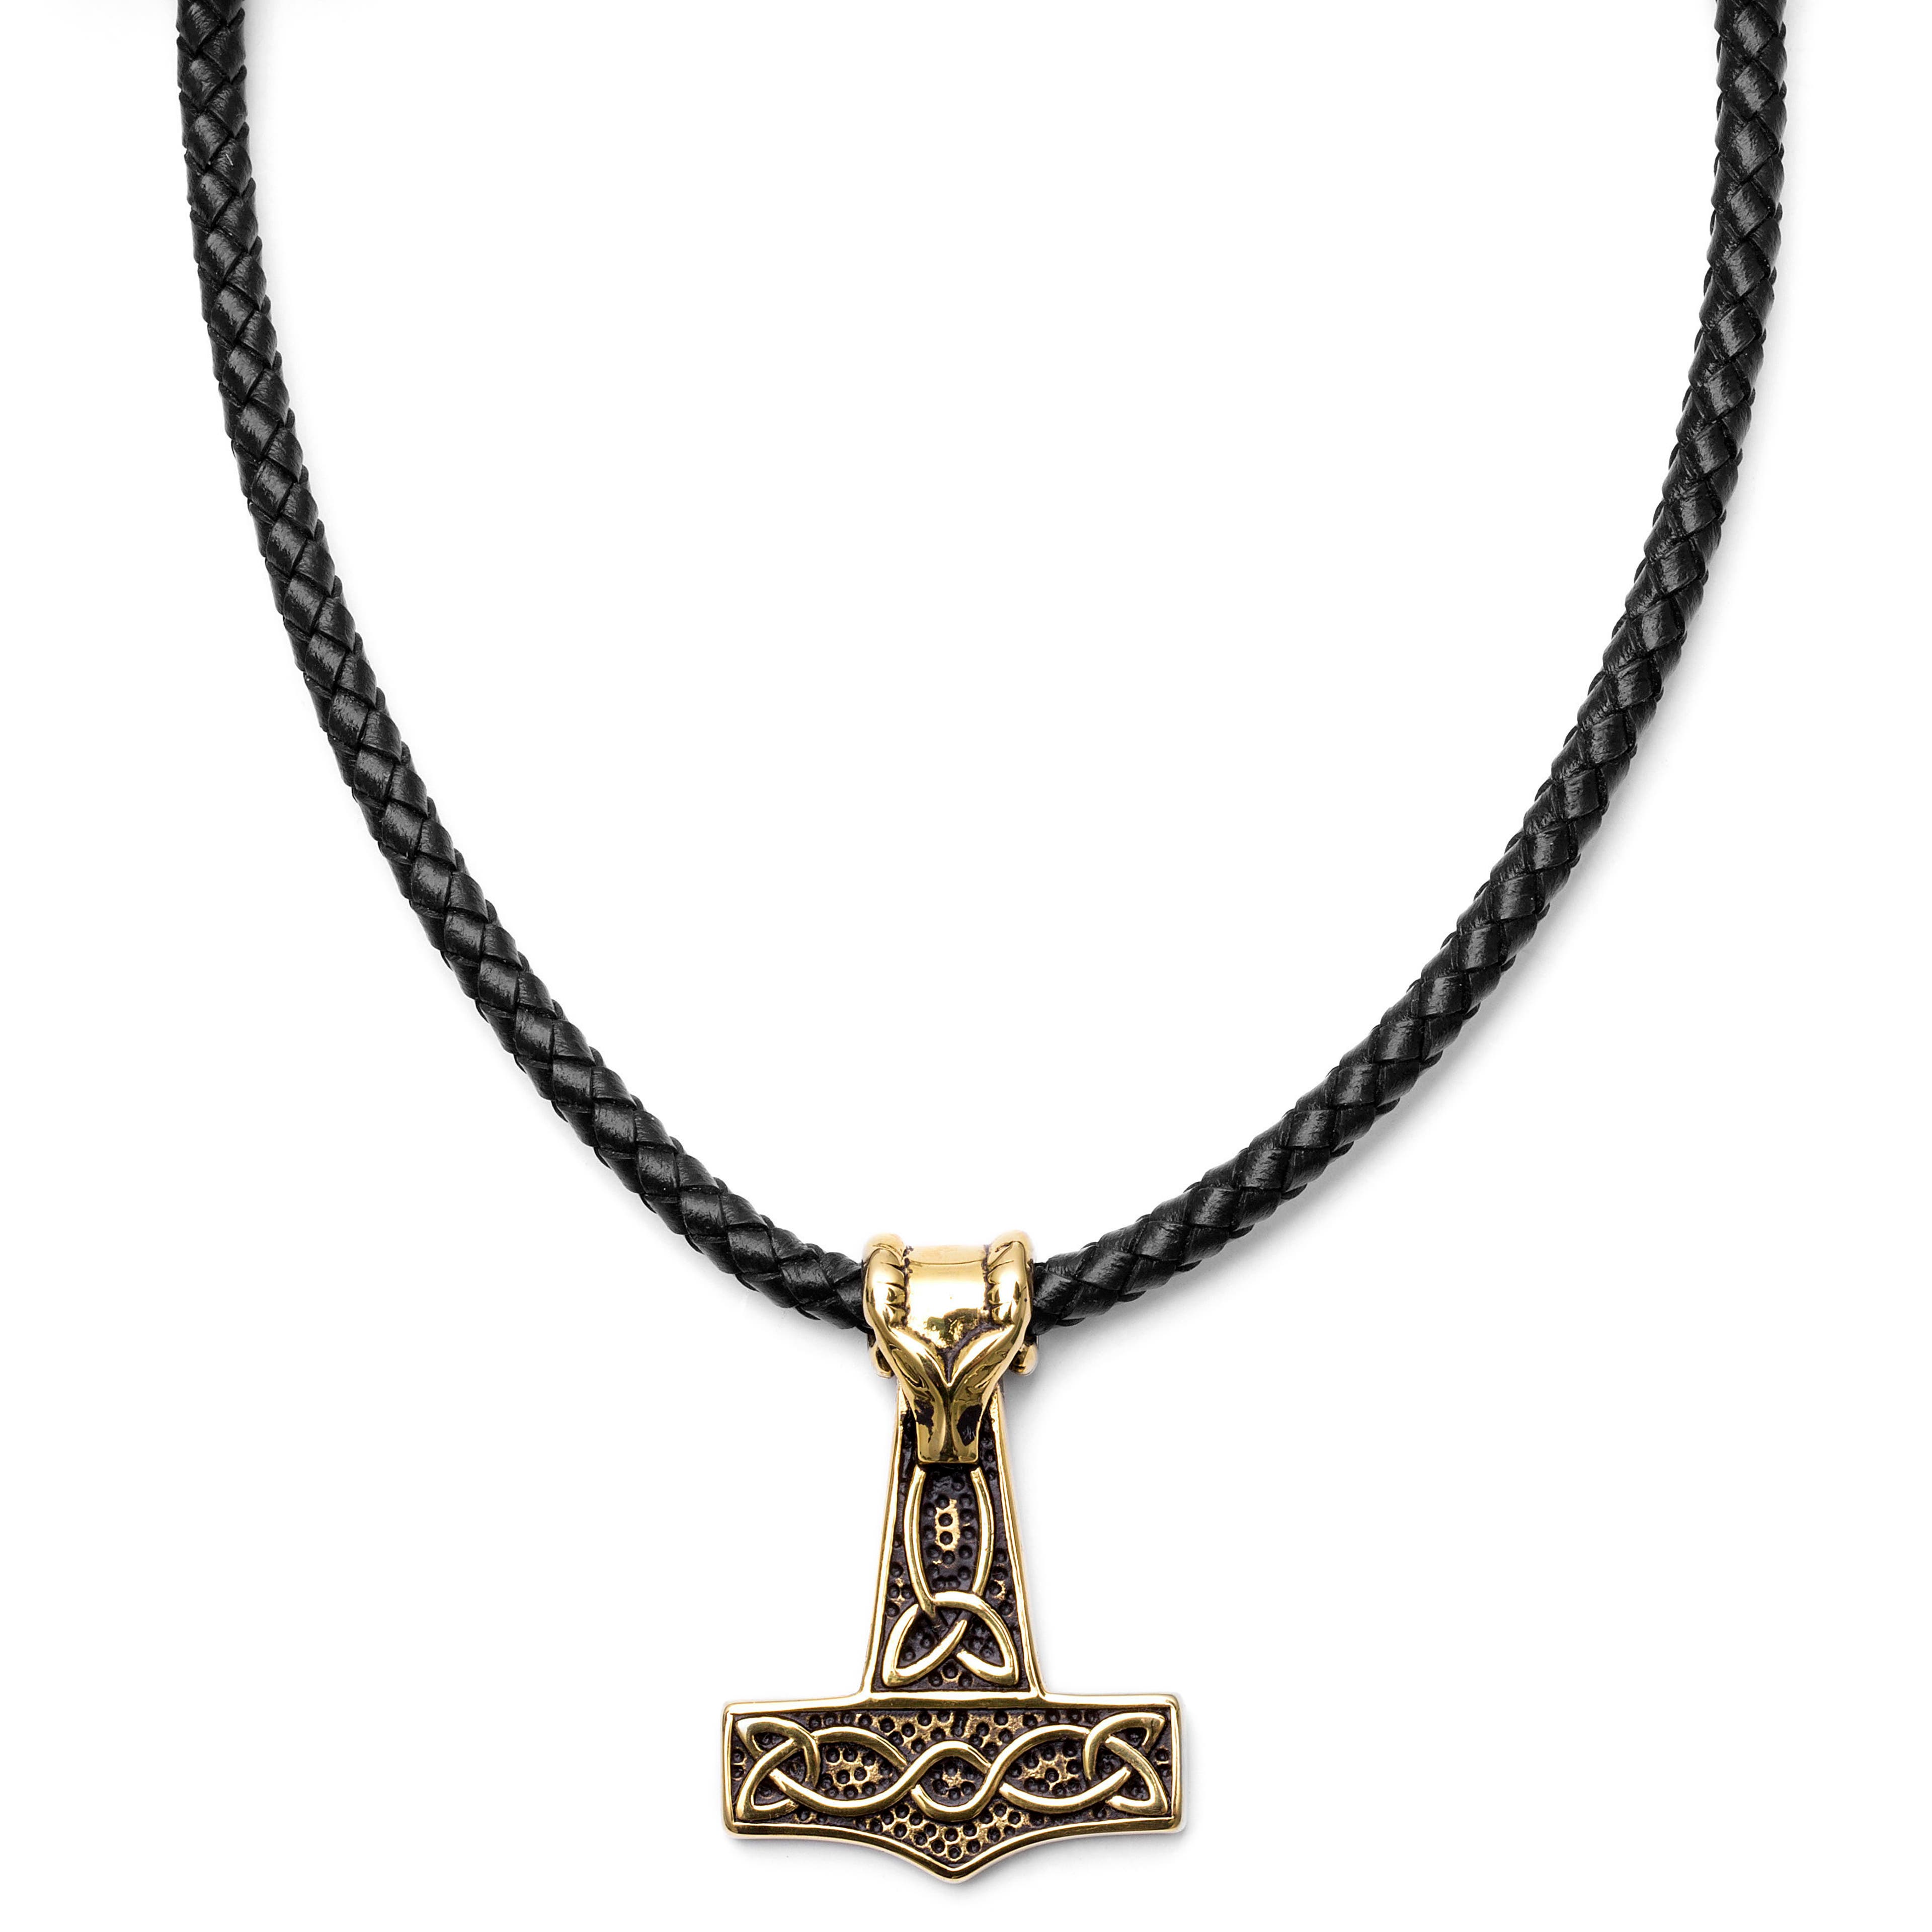 Black Leather With Gold-Tone Thor's Hammer Necklace